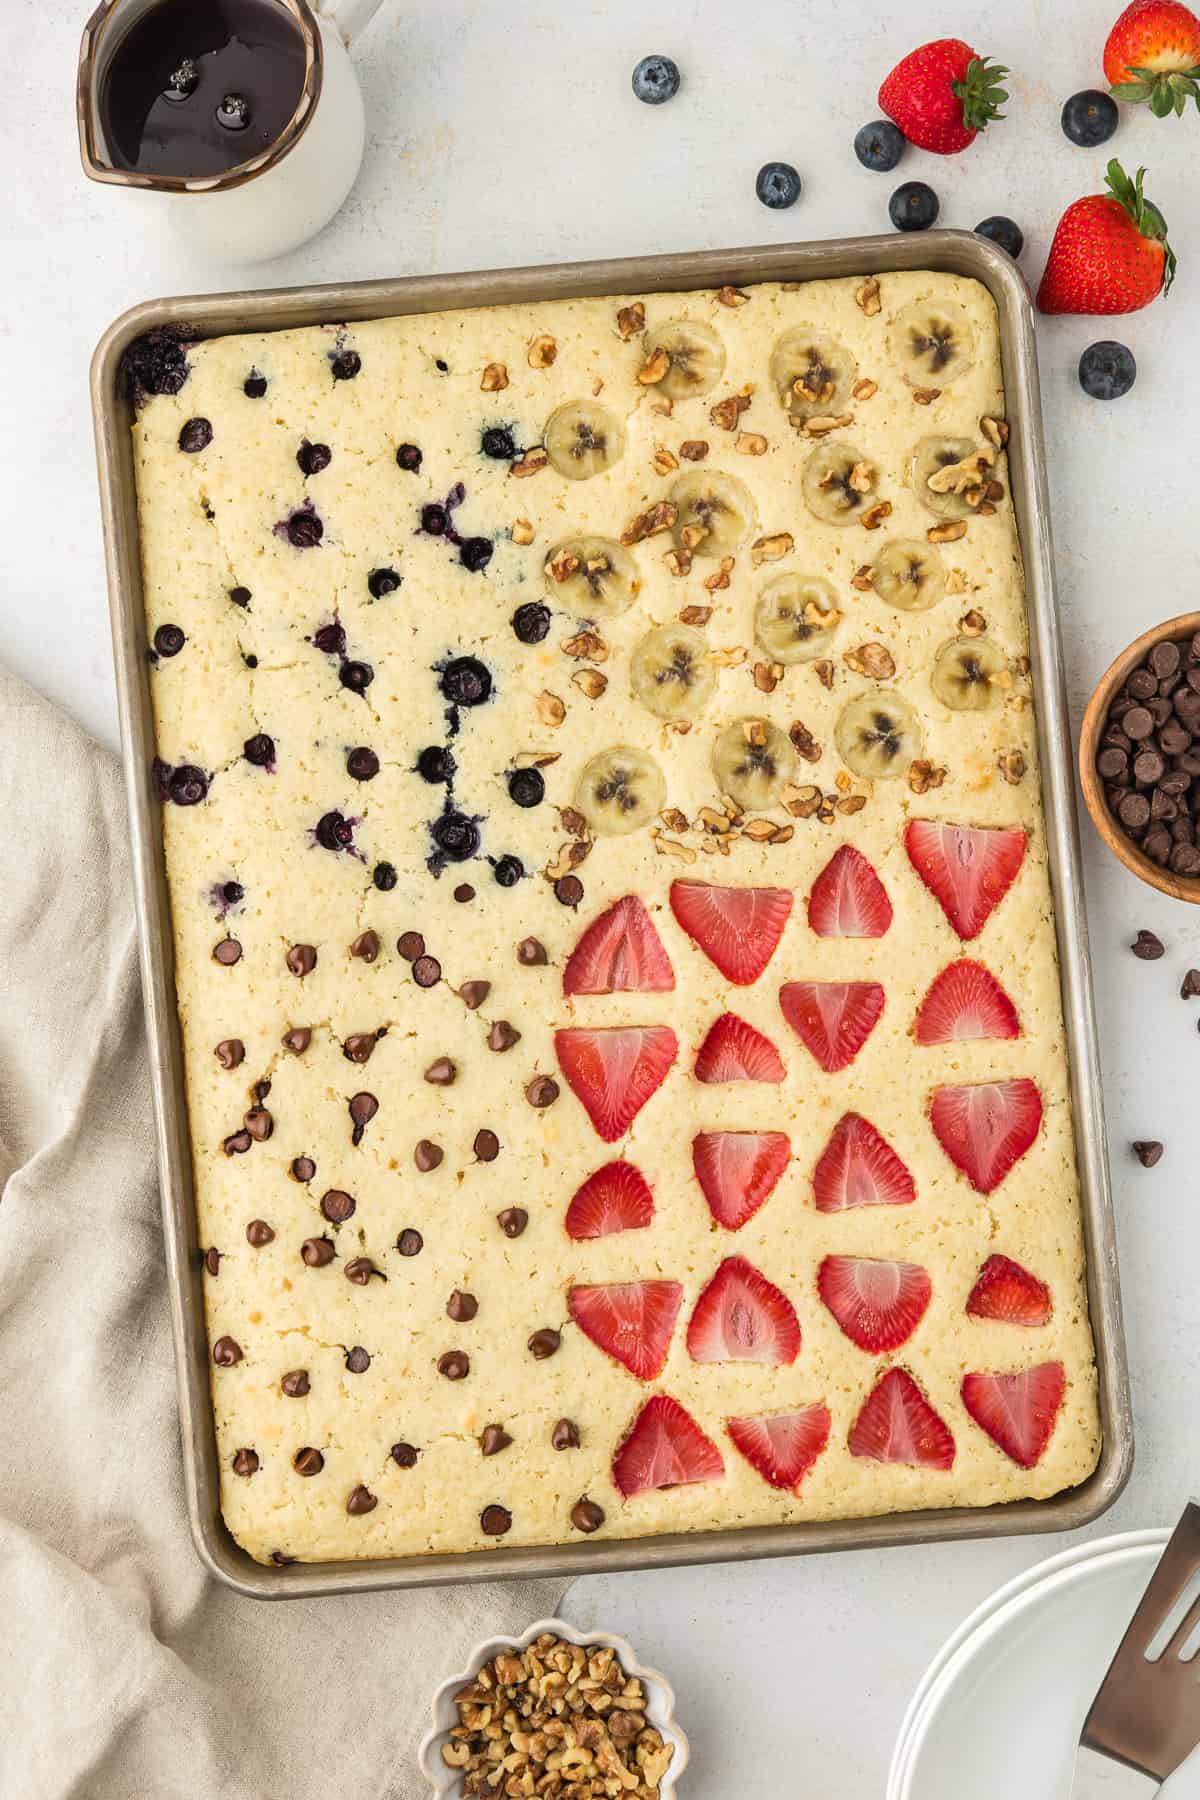 A sheet pan full of pancakes, blueberry pancakes in the upper left corner, banana walnut pancakes in the upper right corner, chocolate chip pancakes in the lower left corner and strawberry pancakes in the lower right corner, with syrup, fresh berries, a cup of chocolate chips, a cup of chopped nuts and a light tan towel surrounding the sheet pan